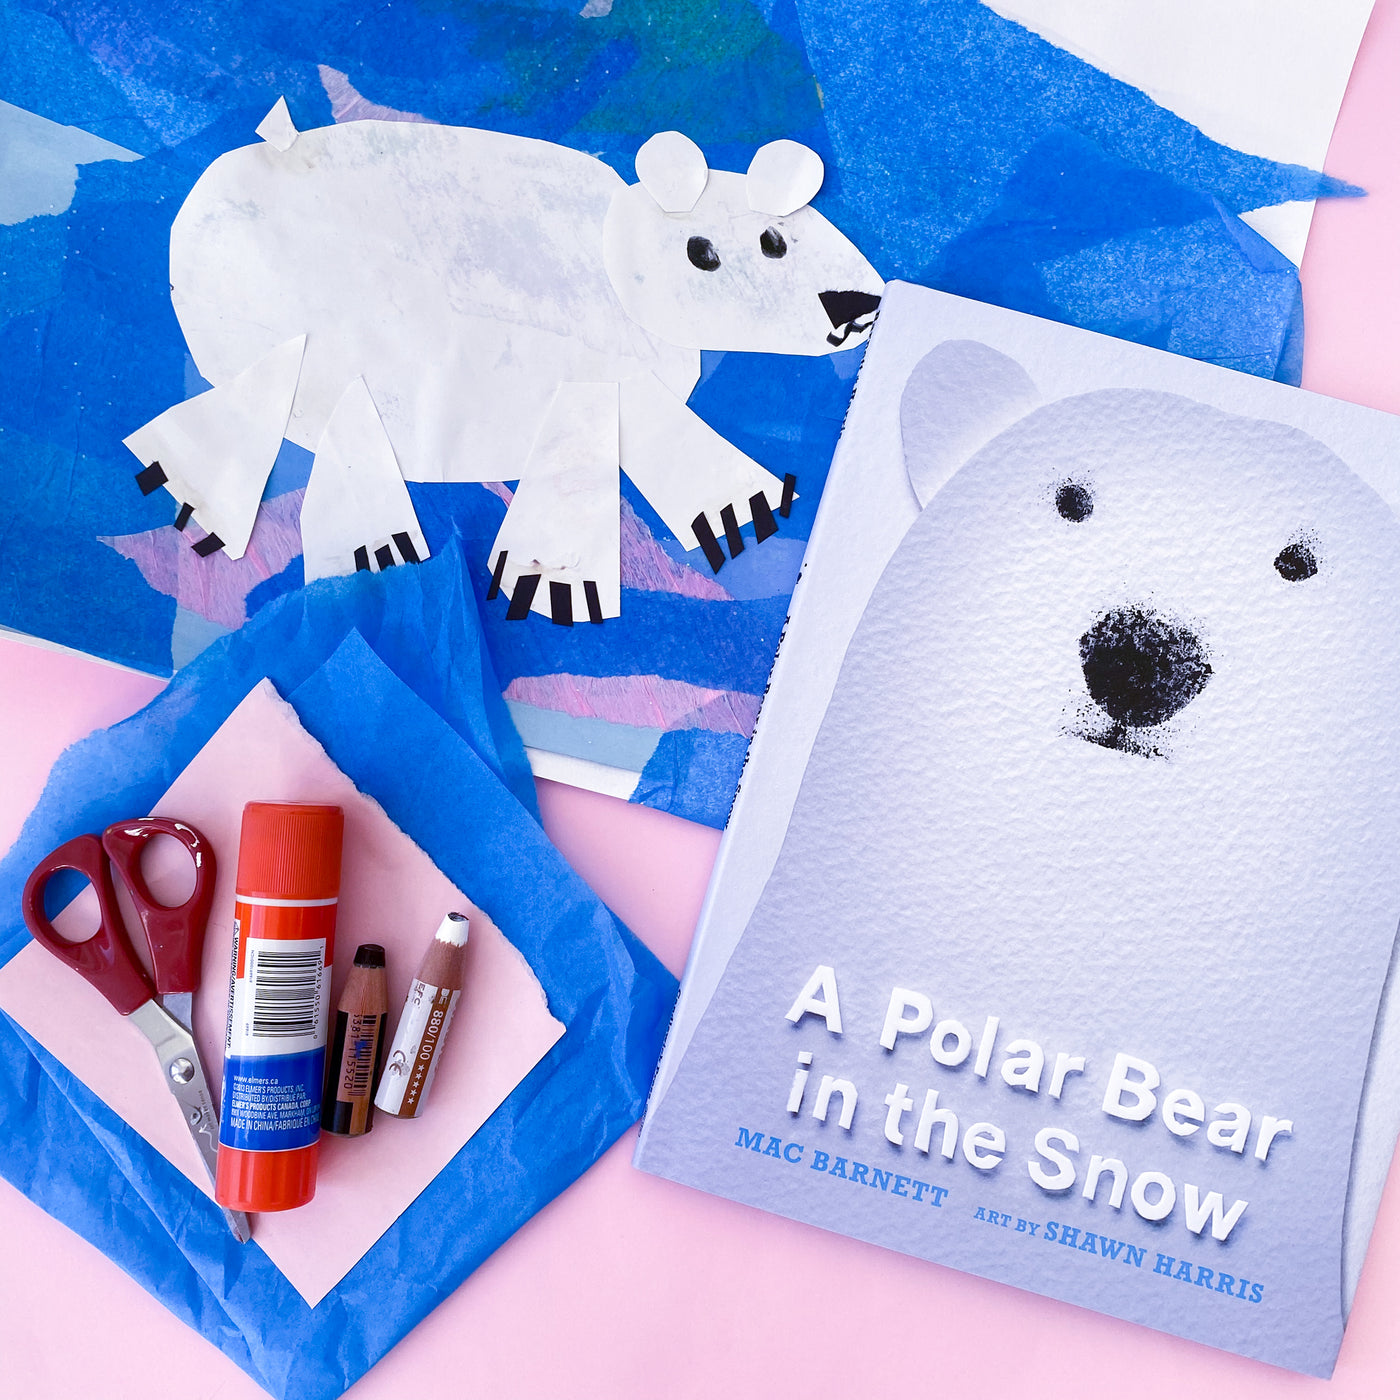 Online Mixed Media Art Class for Kids aged 3 to 8 years inspired by the book a Polar Bear in the Snow